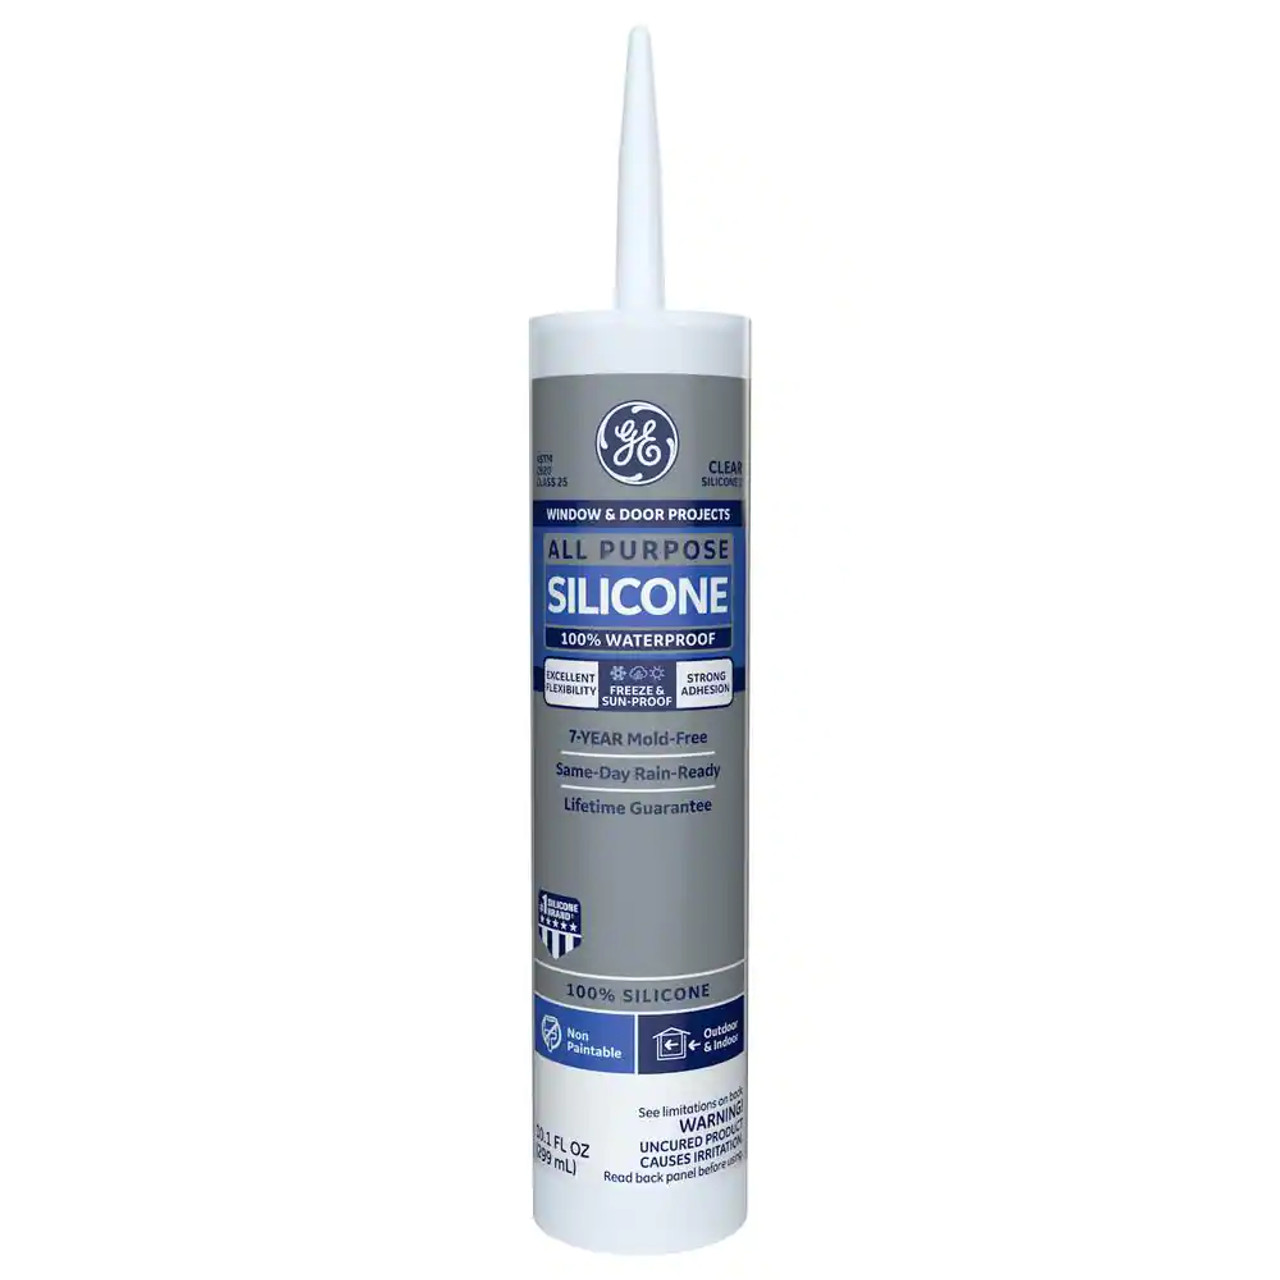 |By the Pallet| Silicone 1 Clear All Purpose Sealant 10.1 oz 2795576 (120 tubes)